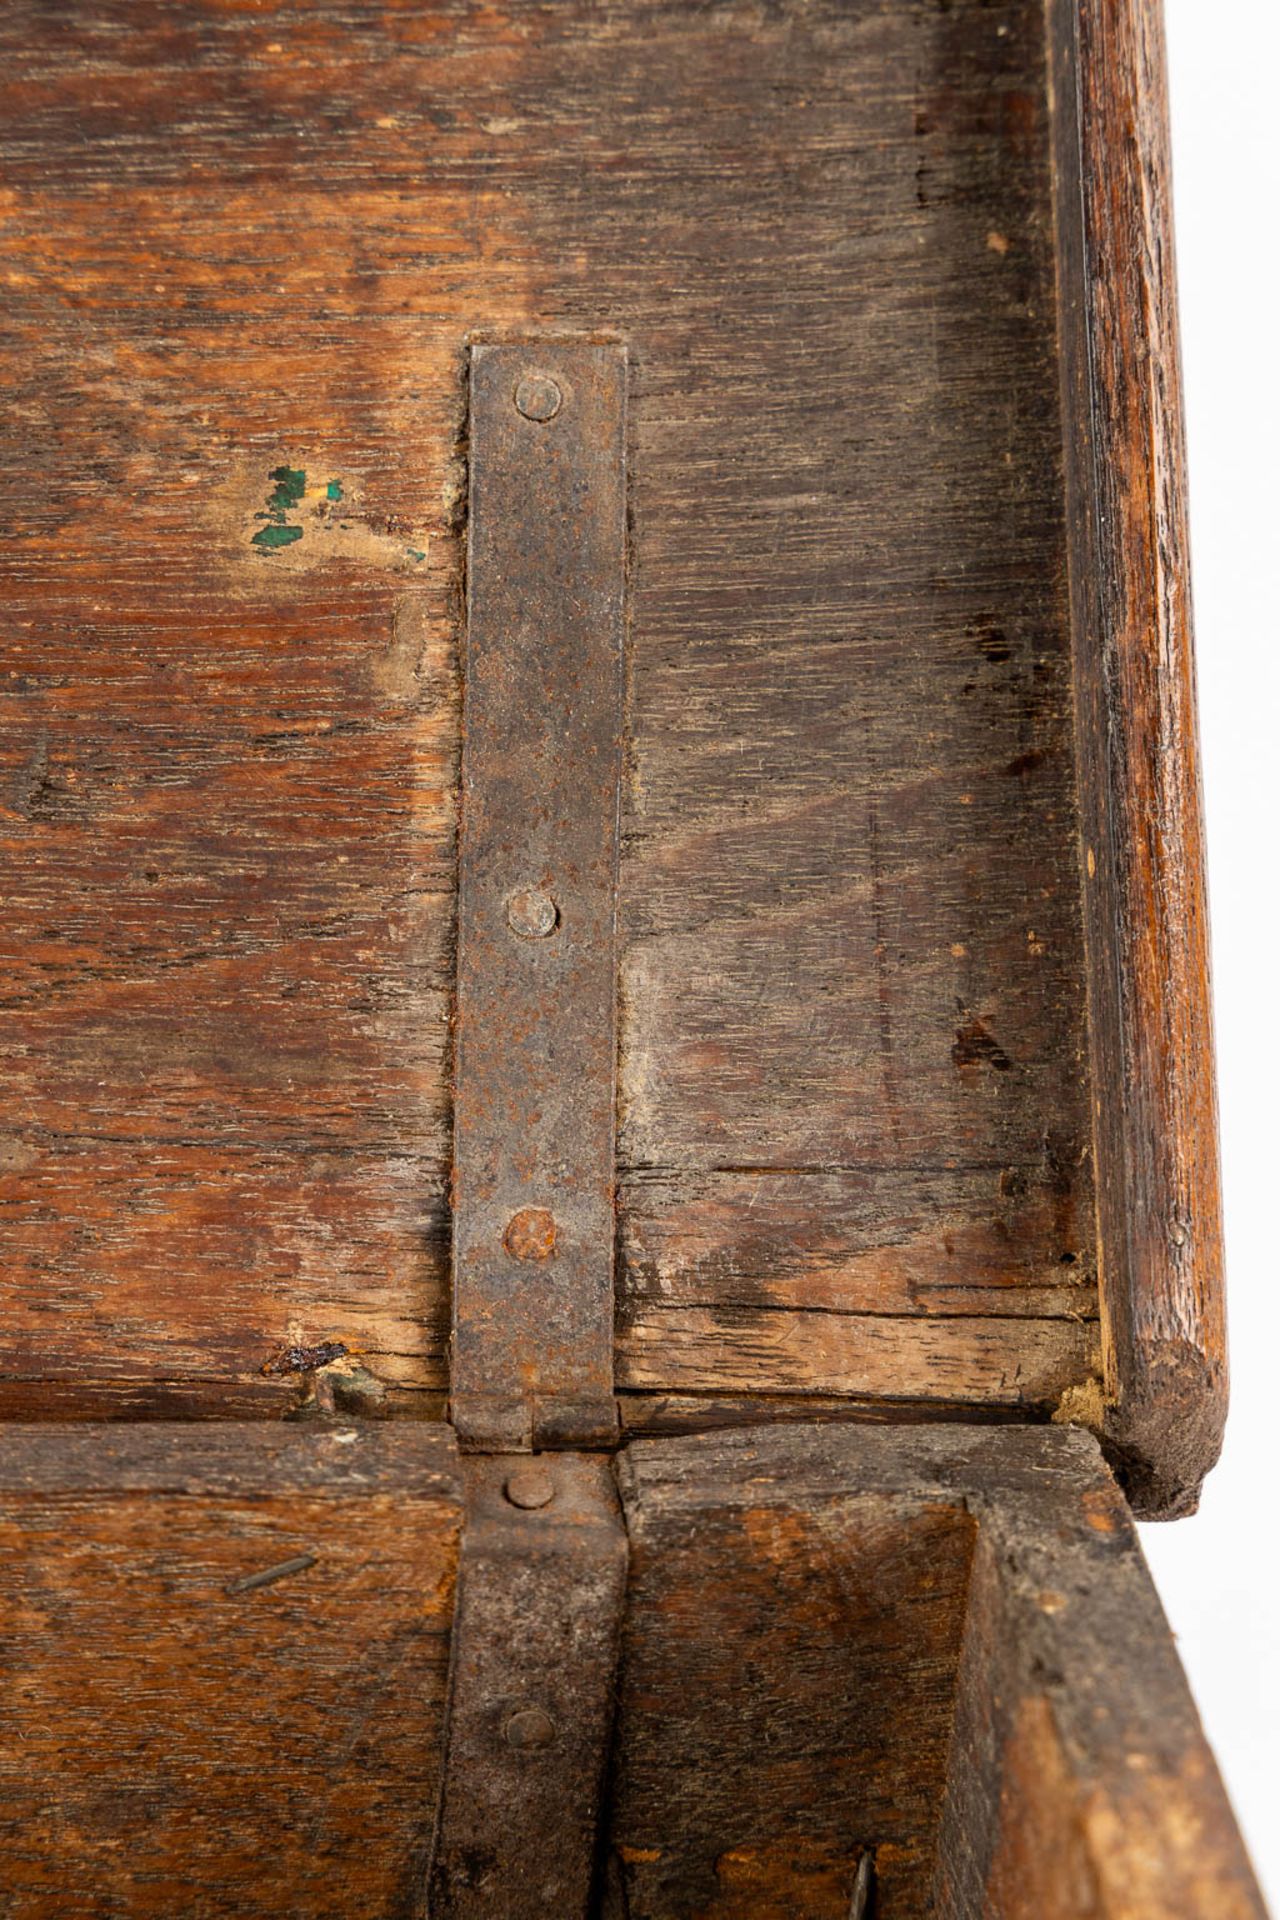 An antique money box or storage chest, oak and wrought iron, 19th C. (L:23 x W:31 x H:13 cm) - Image 9 of 13